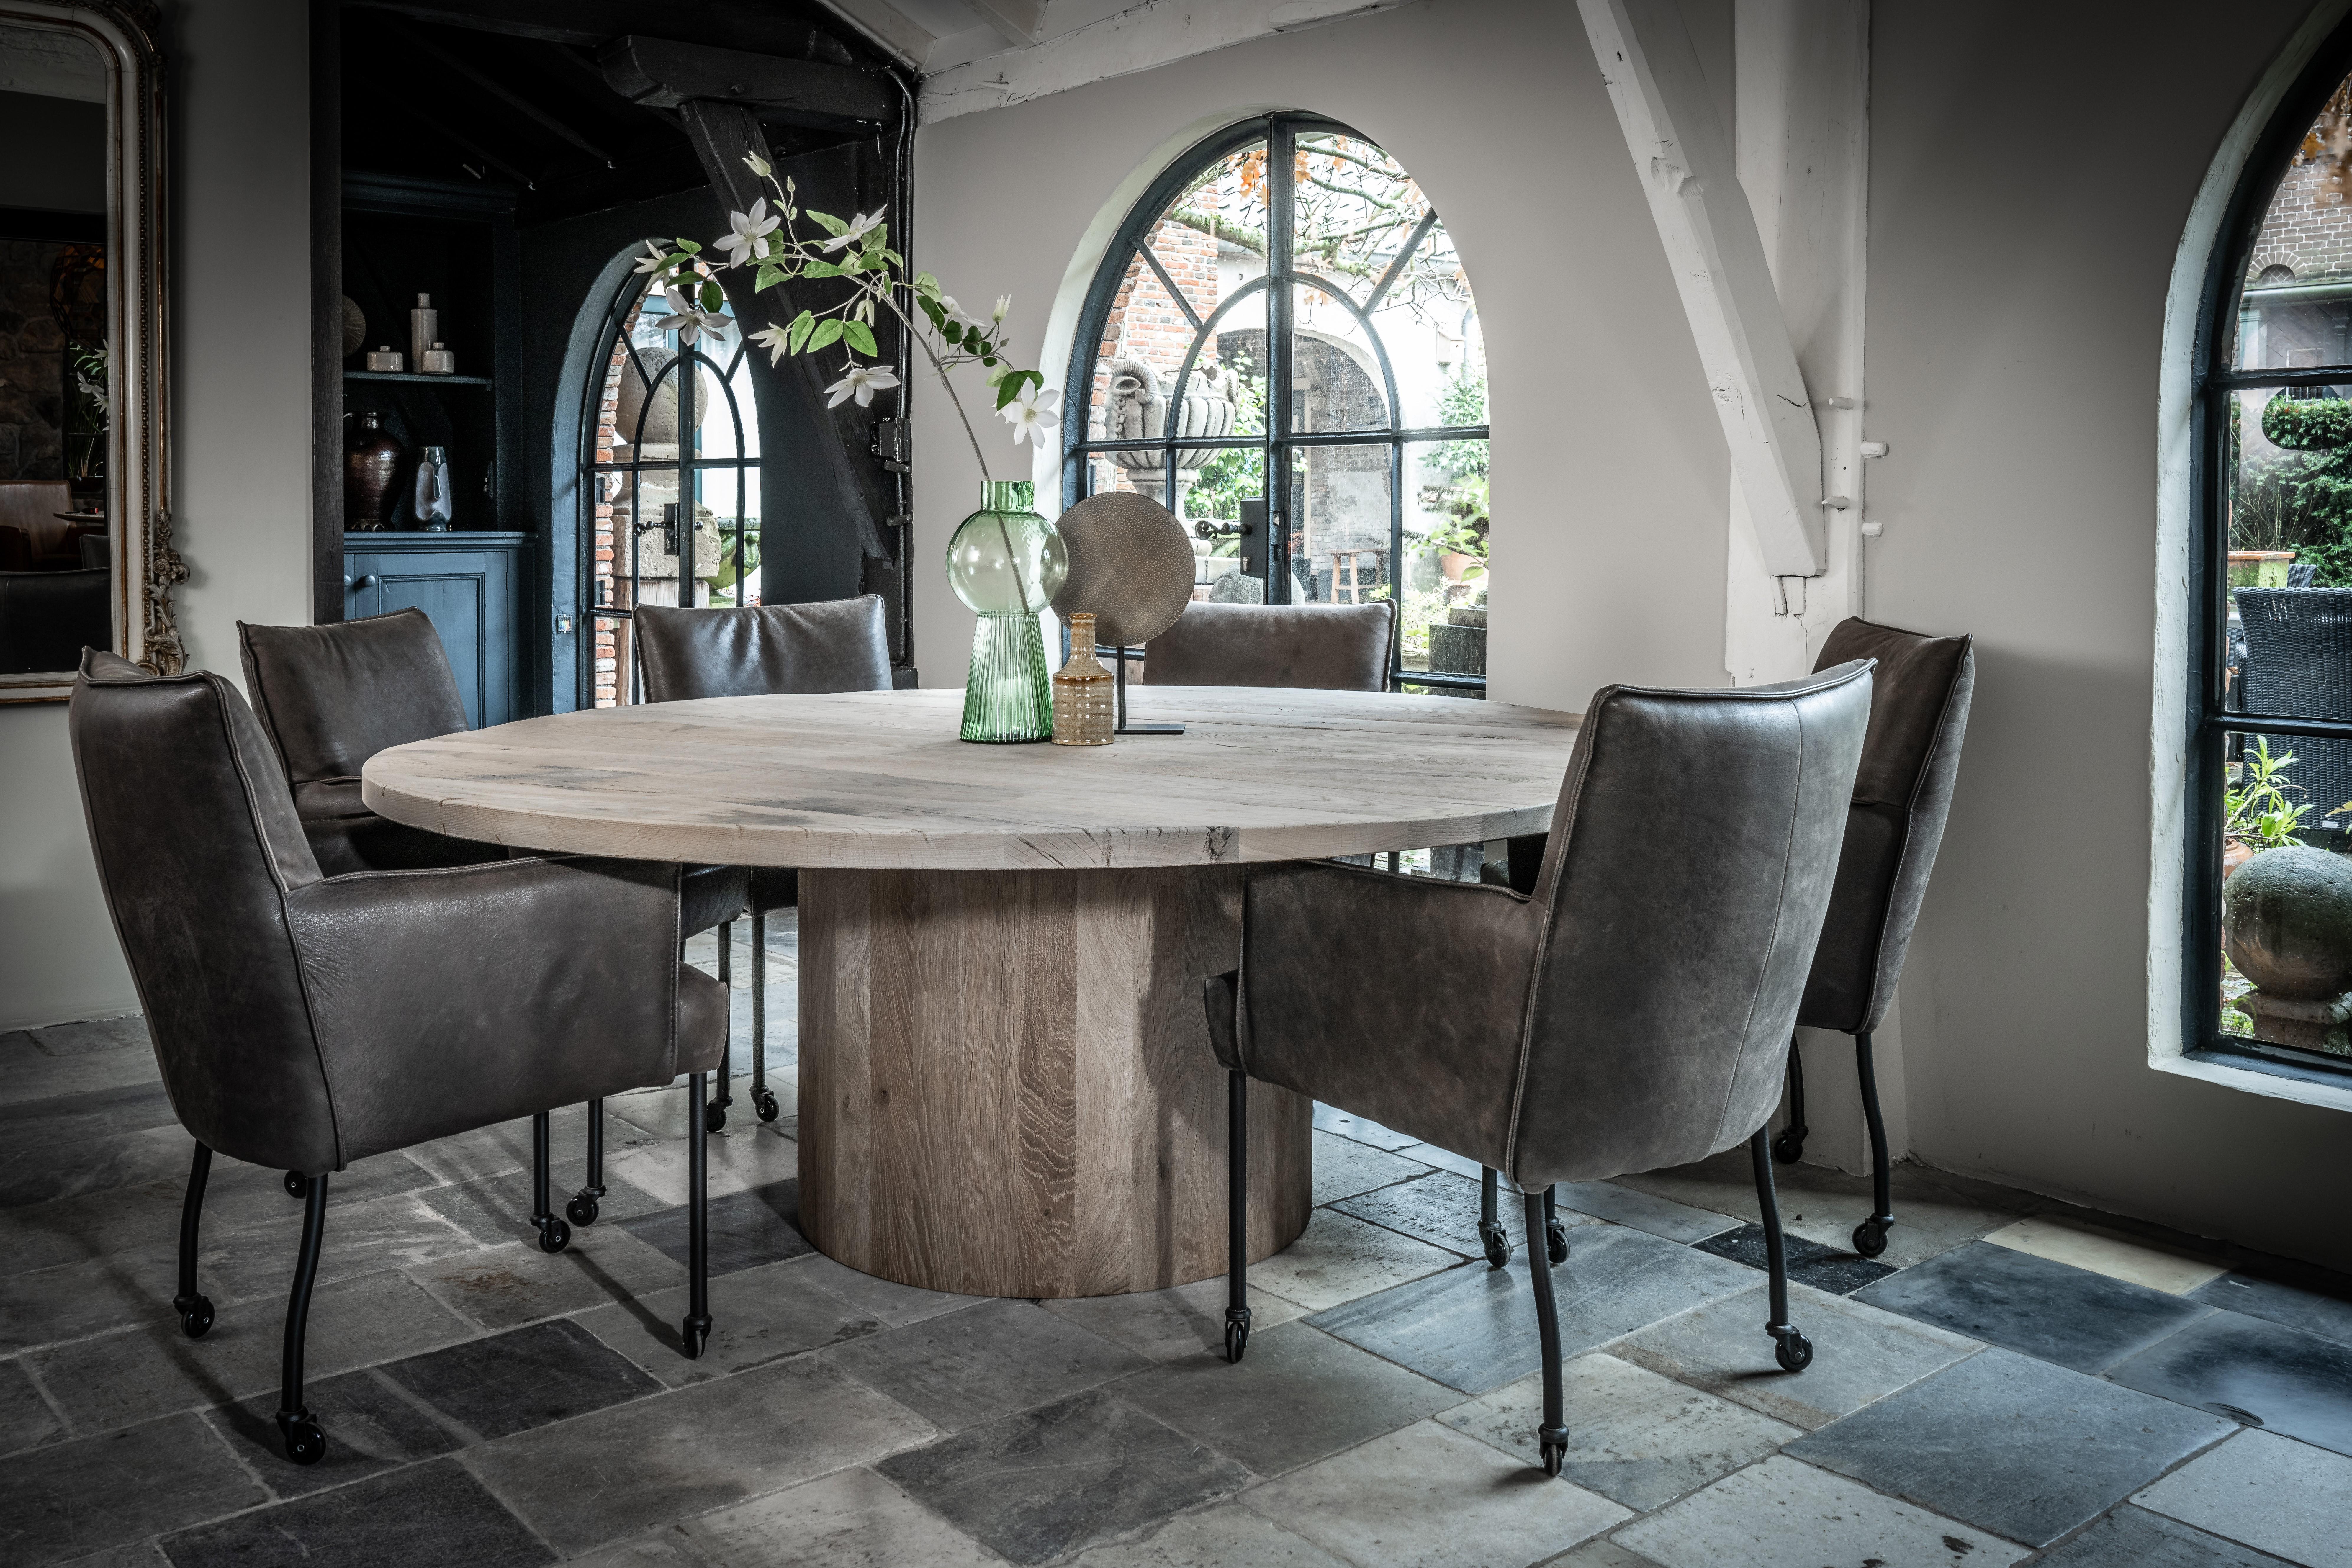 Introducing our round barrel table,  a stunning Modern Rustic dining table—an embodiment of craftsmanship and contemporary design, redefining the essence of circular dining tables for an unparalleled dining experience where everybody can see the